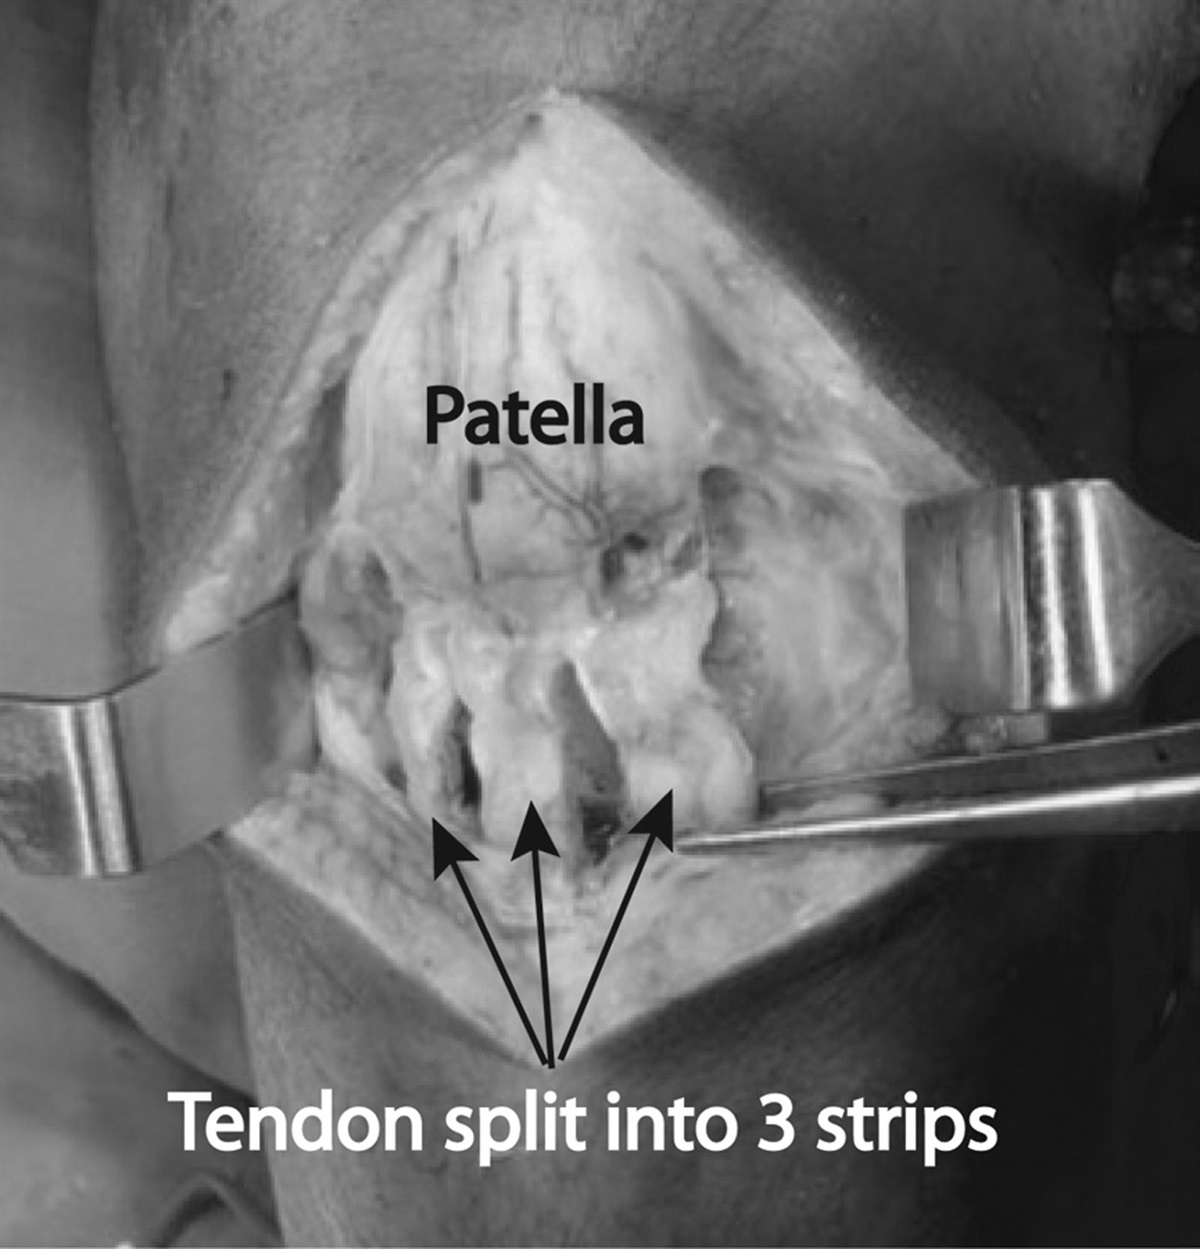 Evaluation of a technique of patellar tendon shortening to correct patella alta associated with severe crouch gait in cerebral palsy